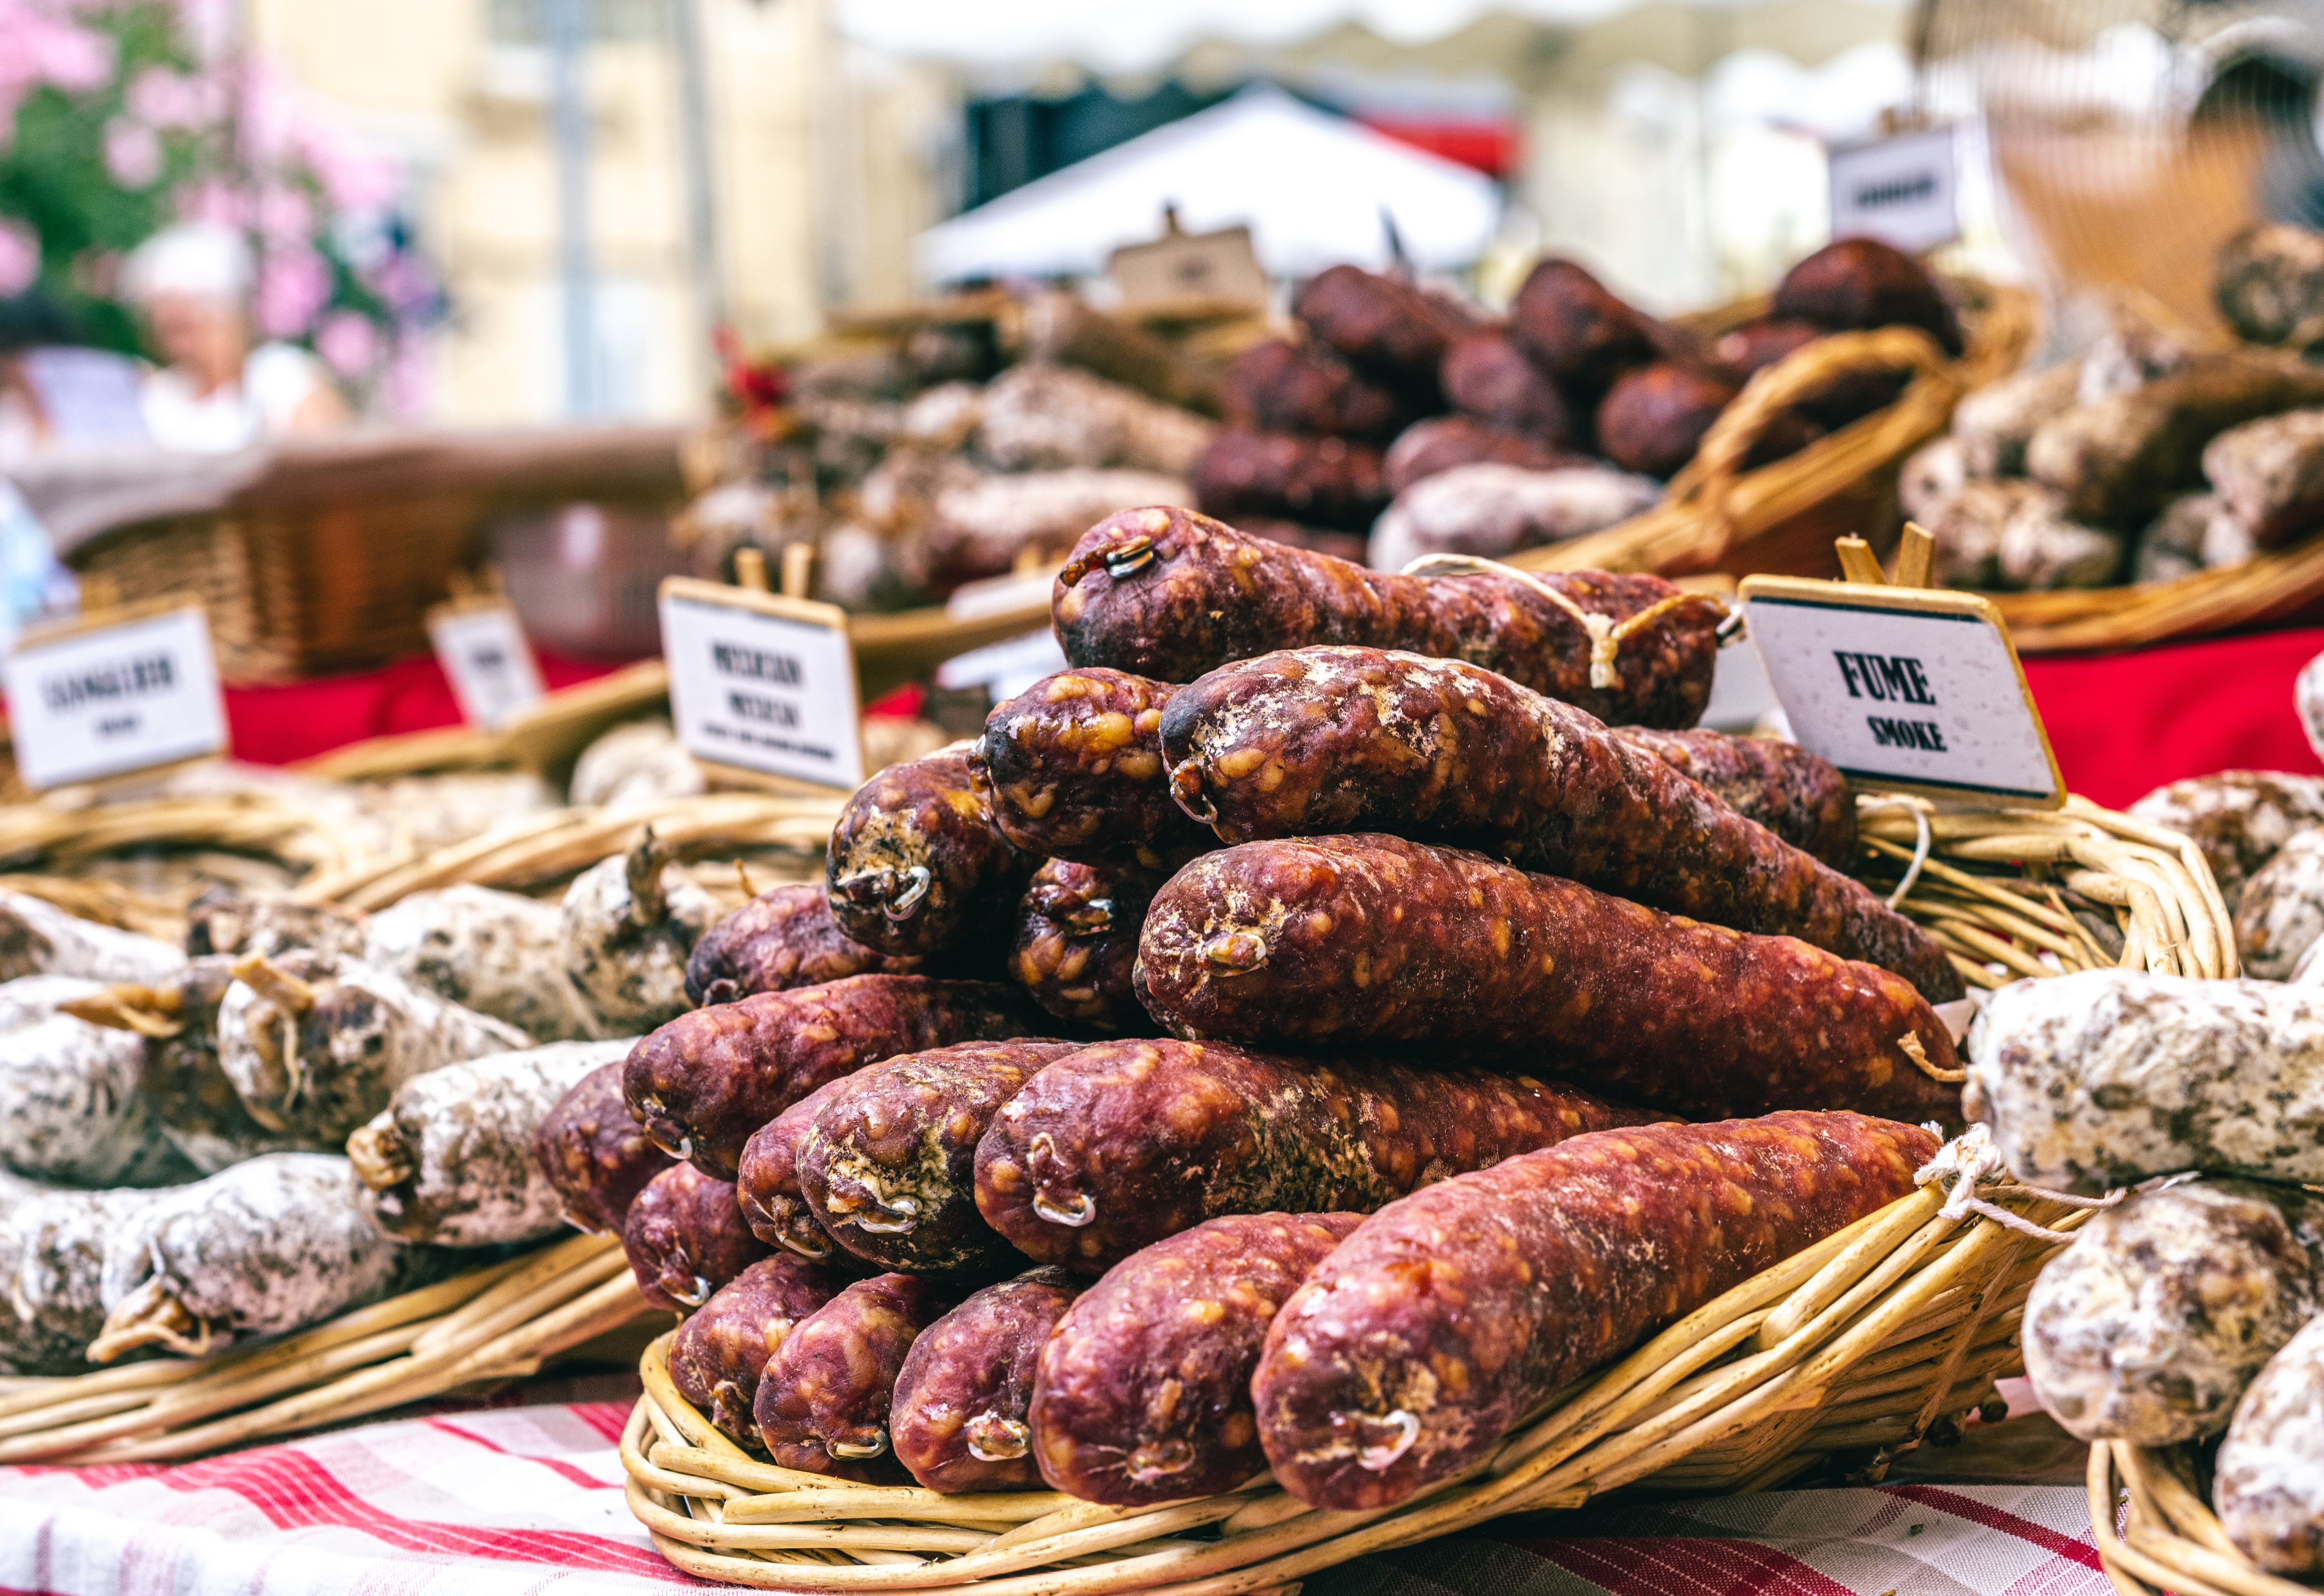 A basket of sausages at a French market